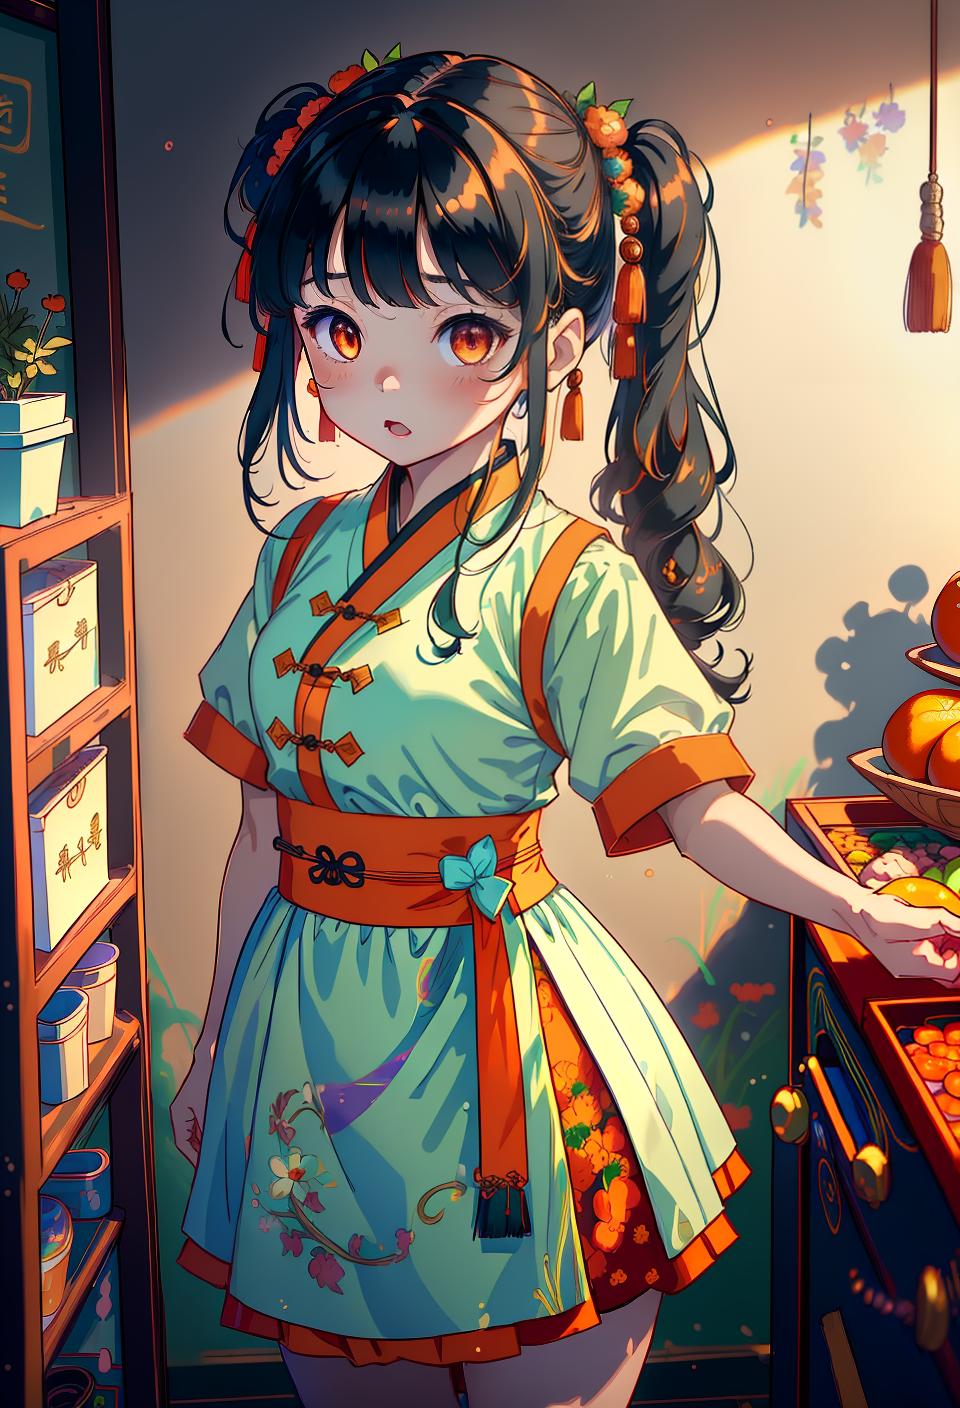  ((trending, highres, masterpiece, cinematic shot)), 1girl, chibi, female chinese outfit, florist shop scene, medium-length wavy rainbow hair, parted bangs, large orange eyes, personality, scared expression, fair skin, epic, energetic